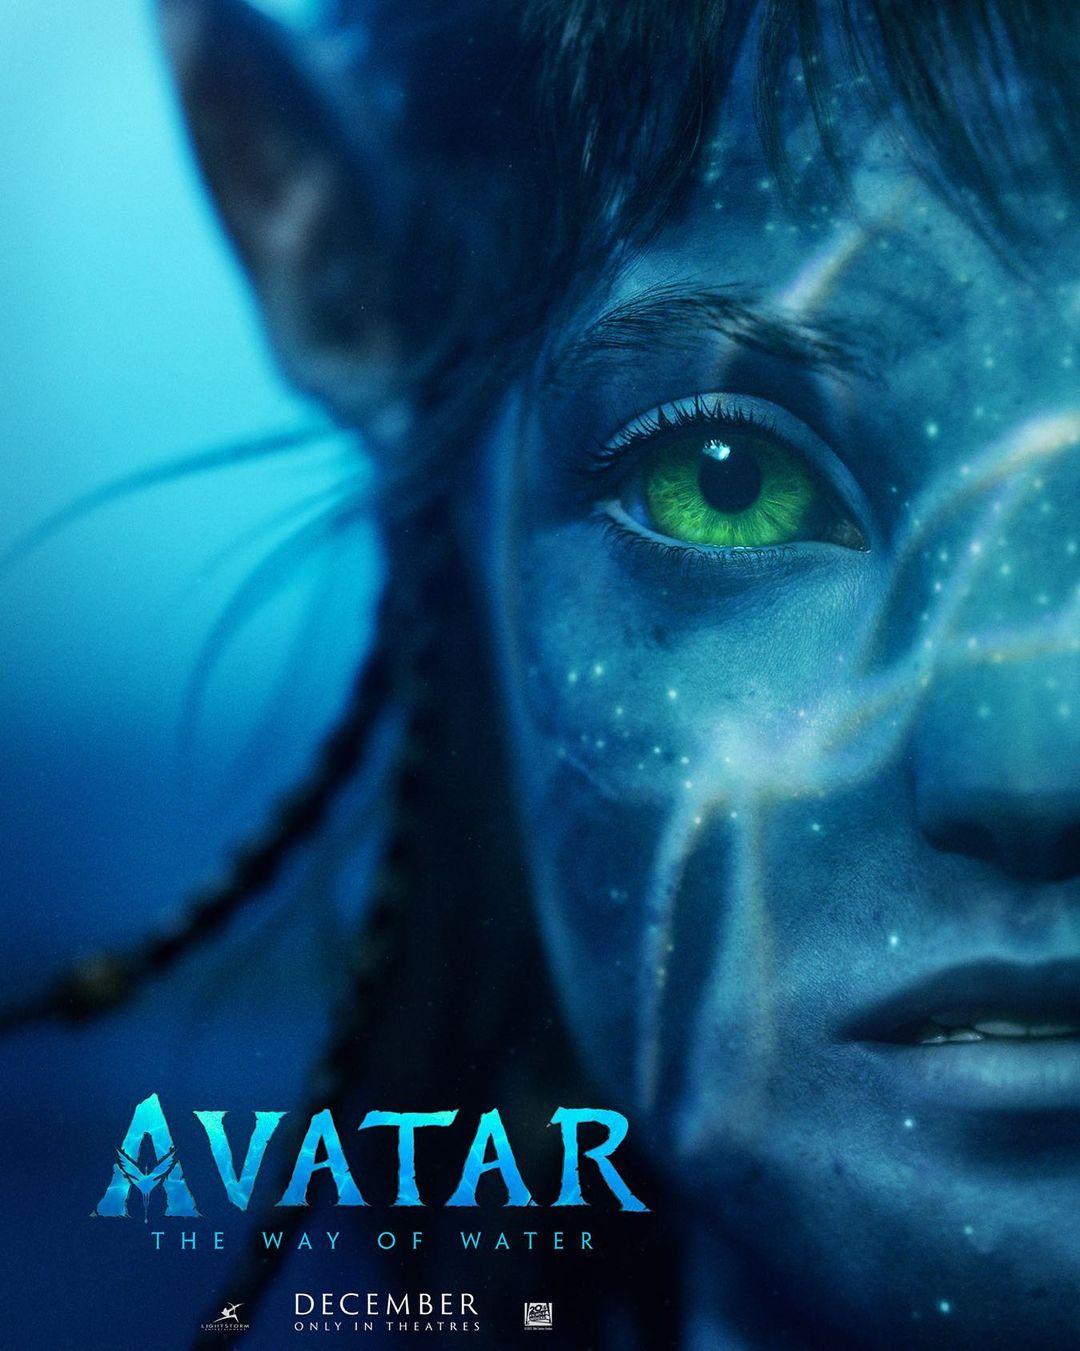 Avatar The Way of Water poster